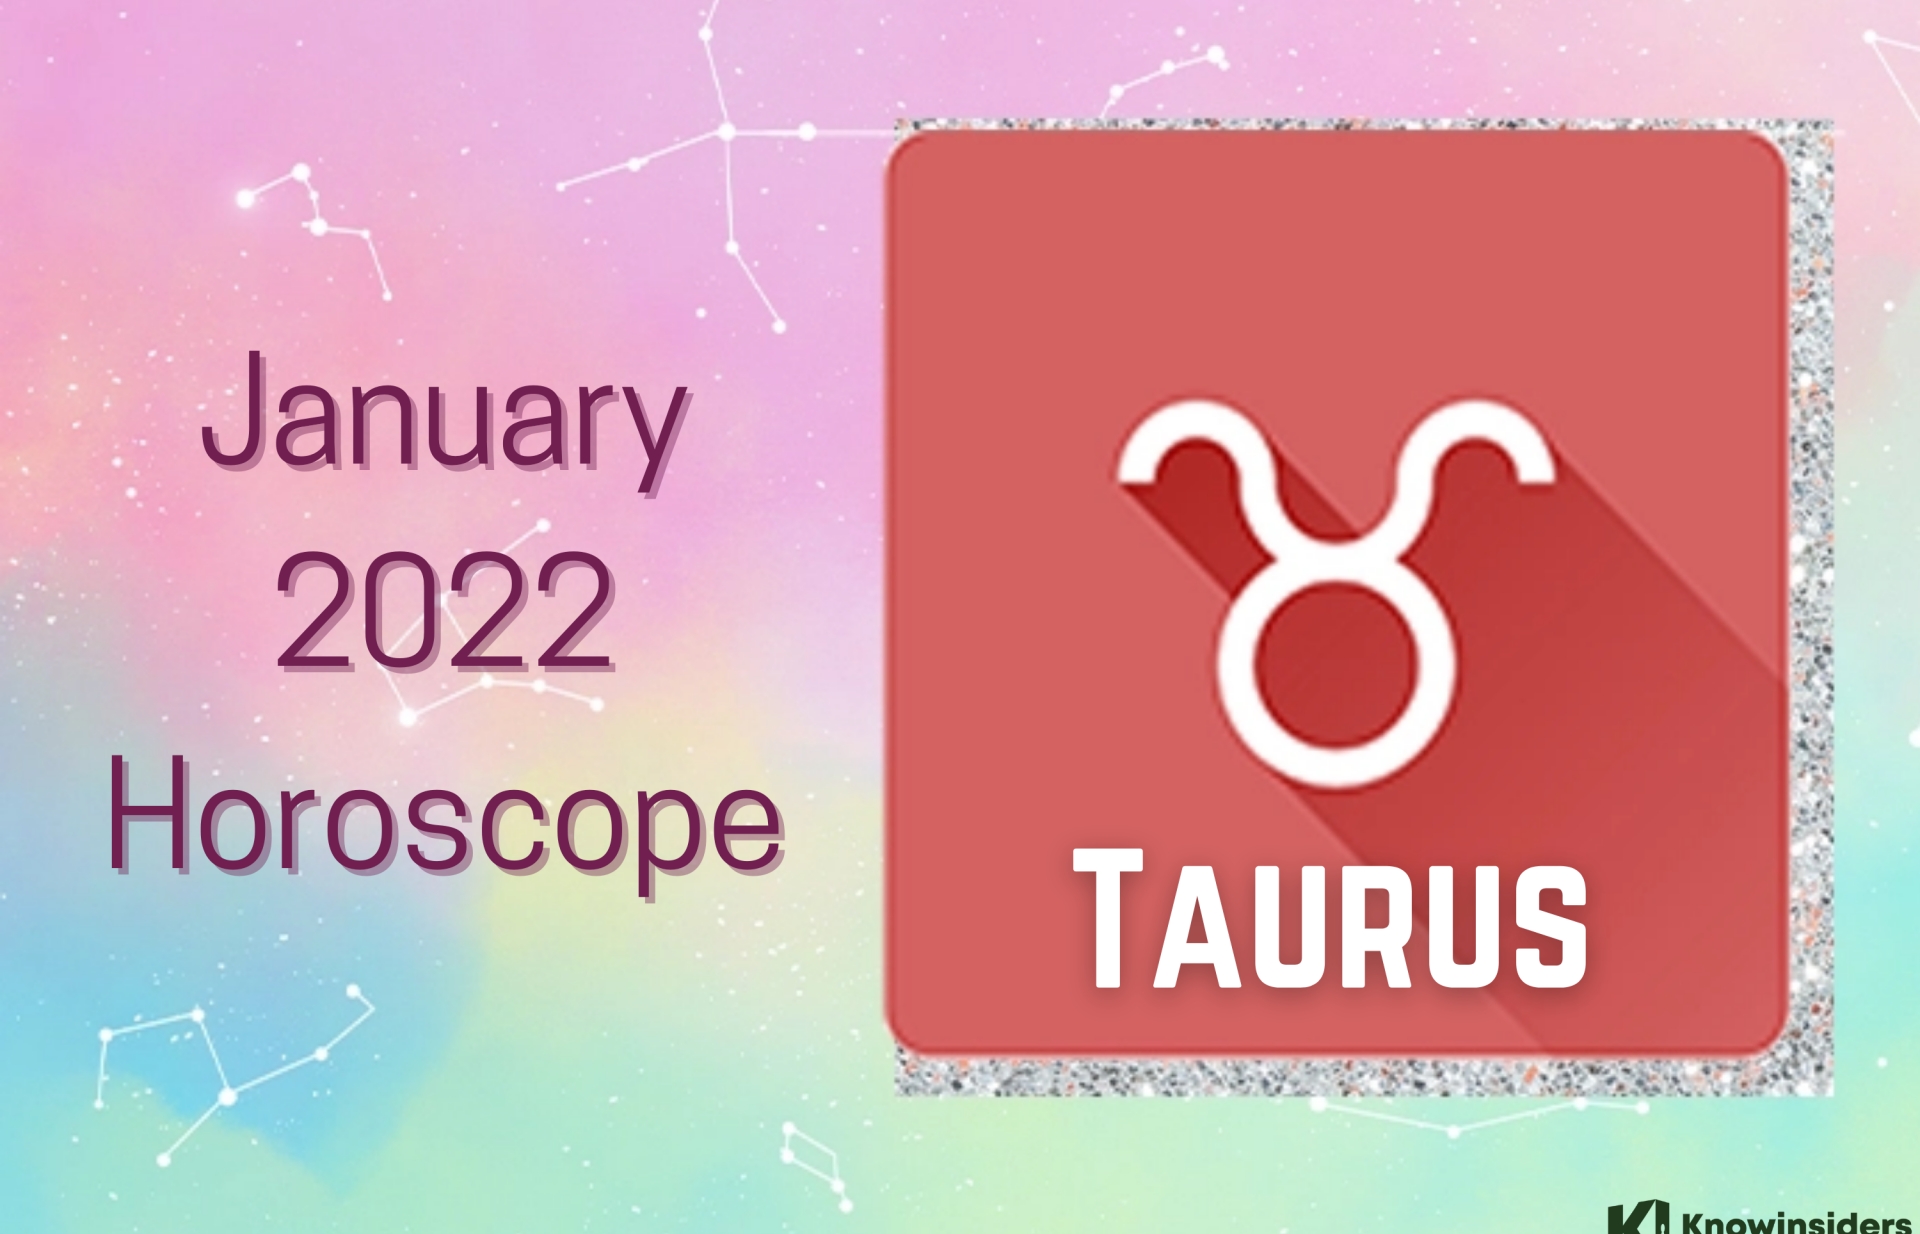 TAURUS January 2022 Horoscope: Monthly Prediction for Love, Career, Money and Health